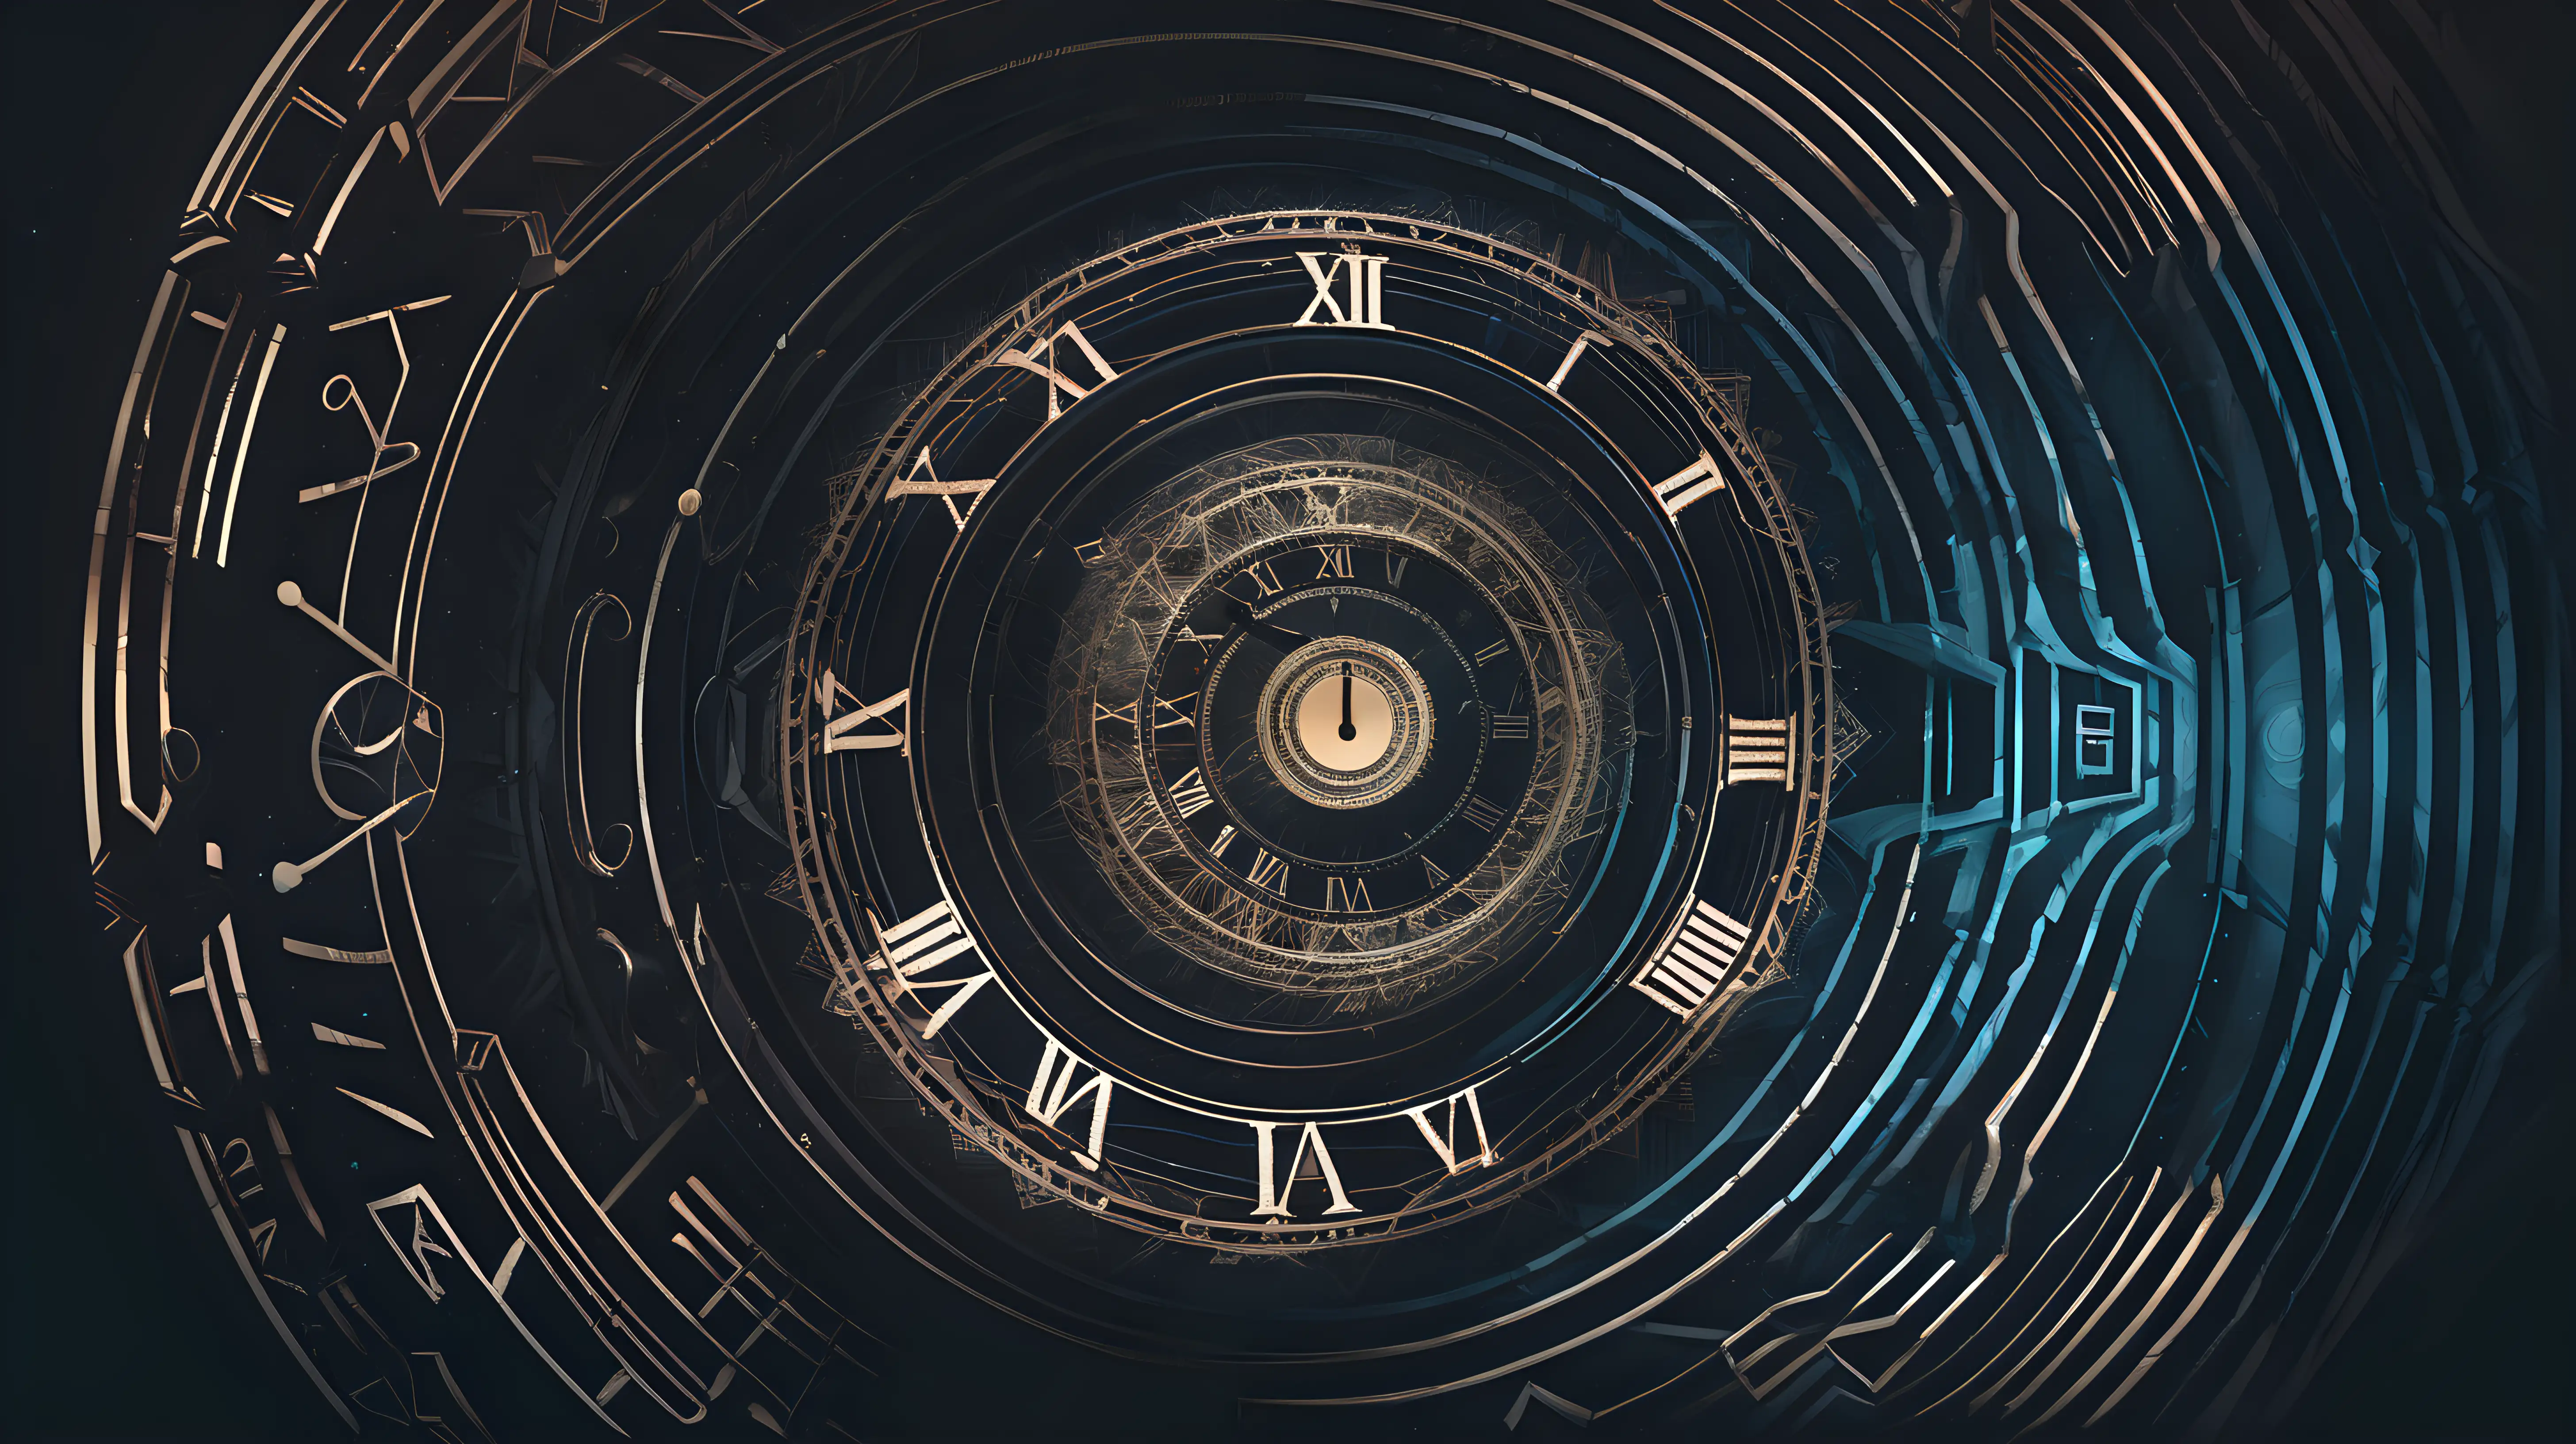 Create a captivating graphic for a digital escape room experience, using Abstract Time Warps to evoke a sense of mystery and time-related challenges.